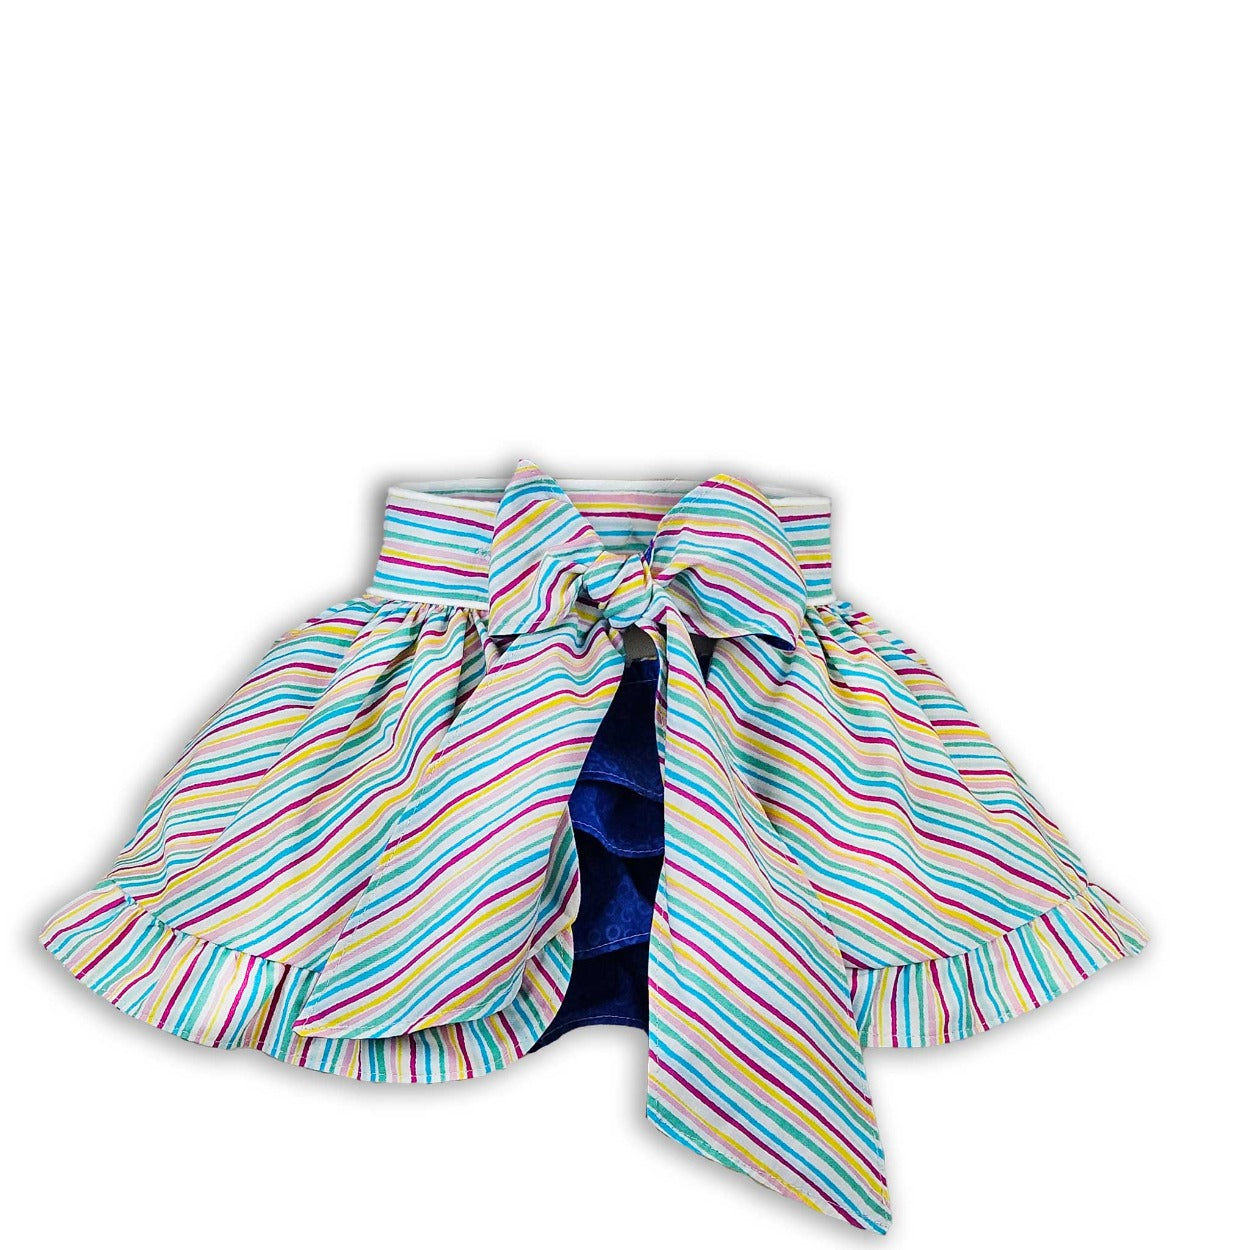 skirts for girls with bow tie options striped blue